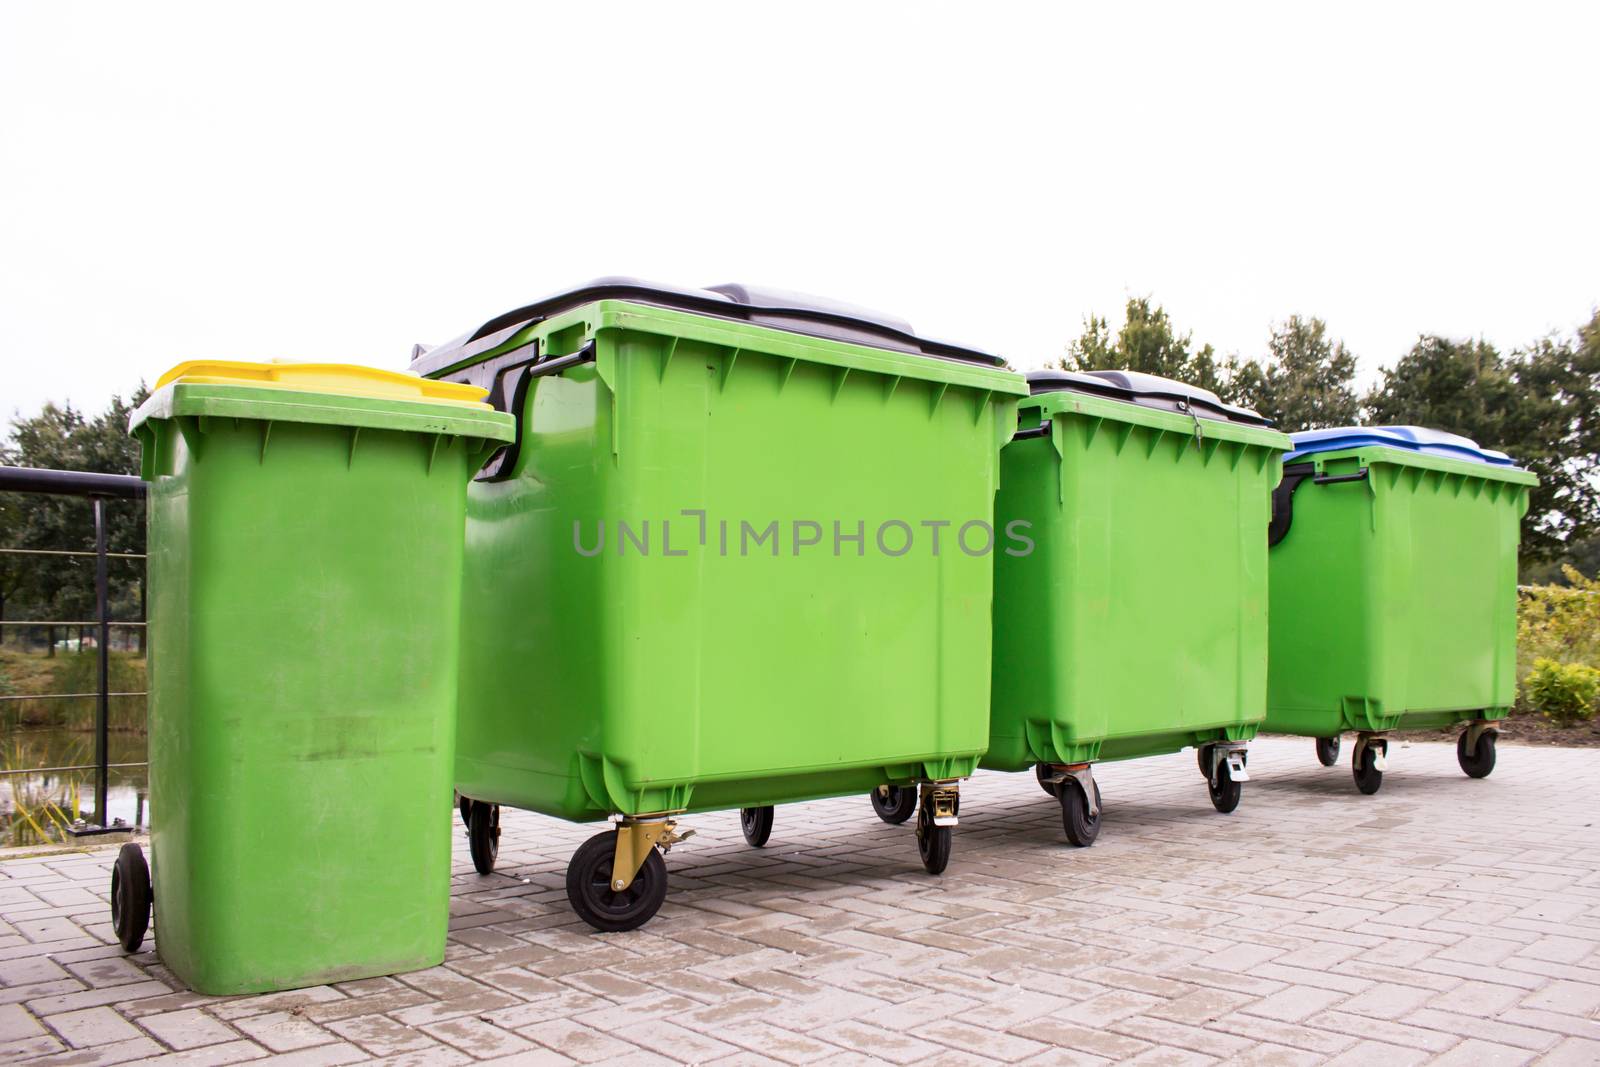 Greeen garbage containers in a row by BenSchonewille